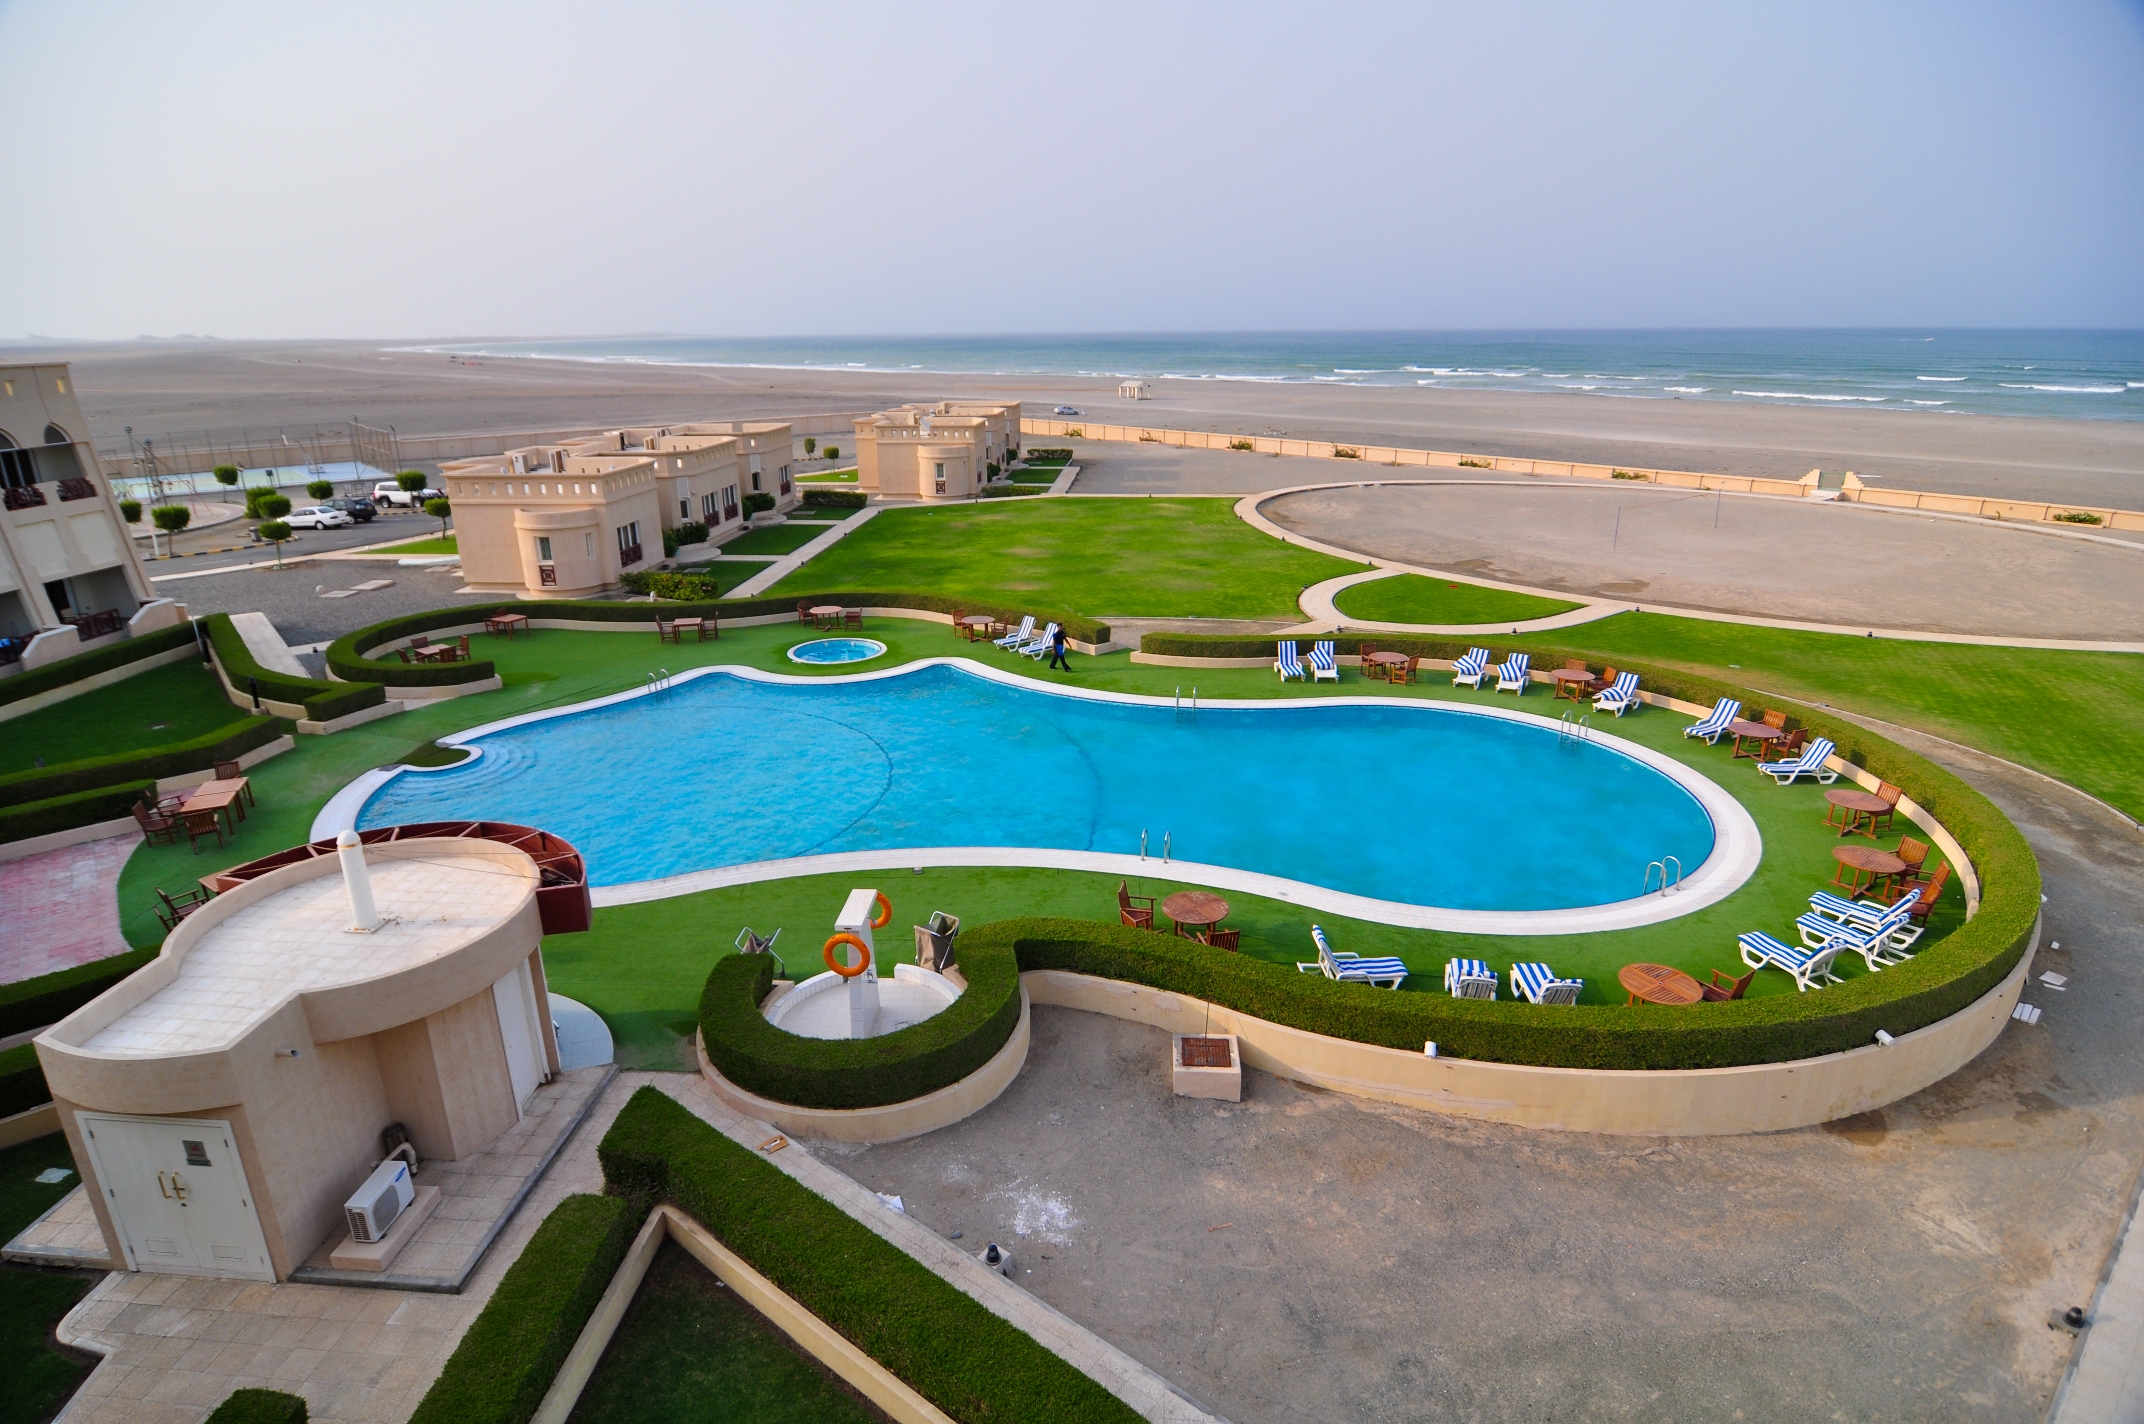 Revenue of star hotels in Oman drops 8% to OMR53m in first quarter